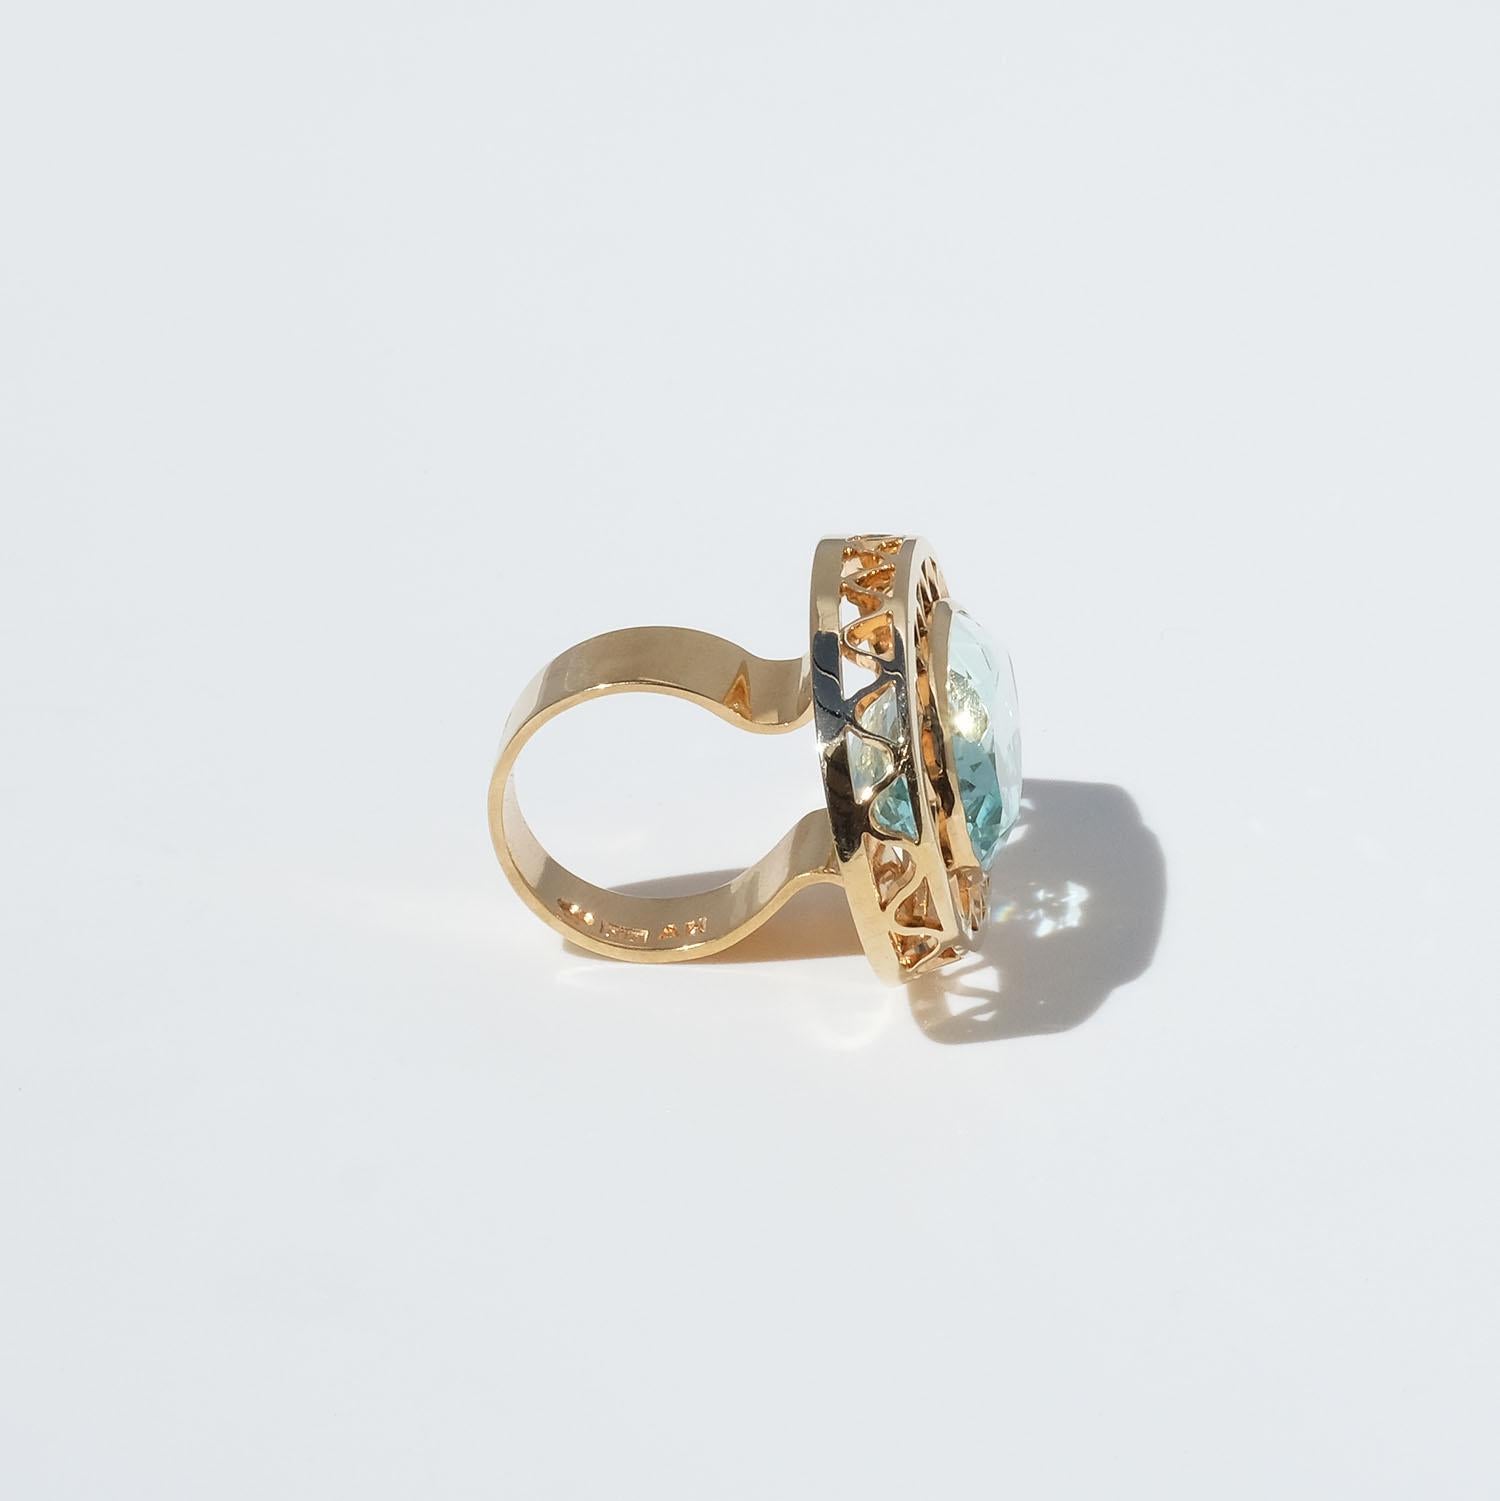 Vintage 18k Gold and Aquamarine Ring by Master Anders Högberg Year, 1977 For Sale 2